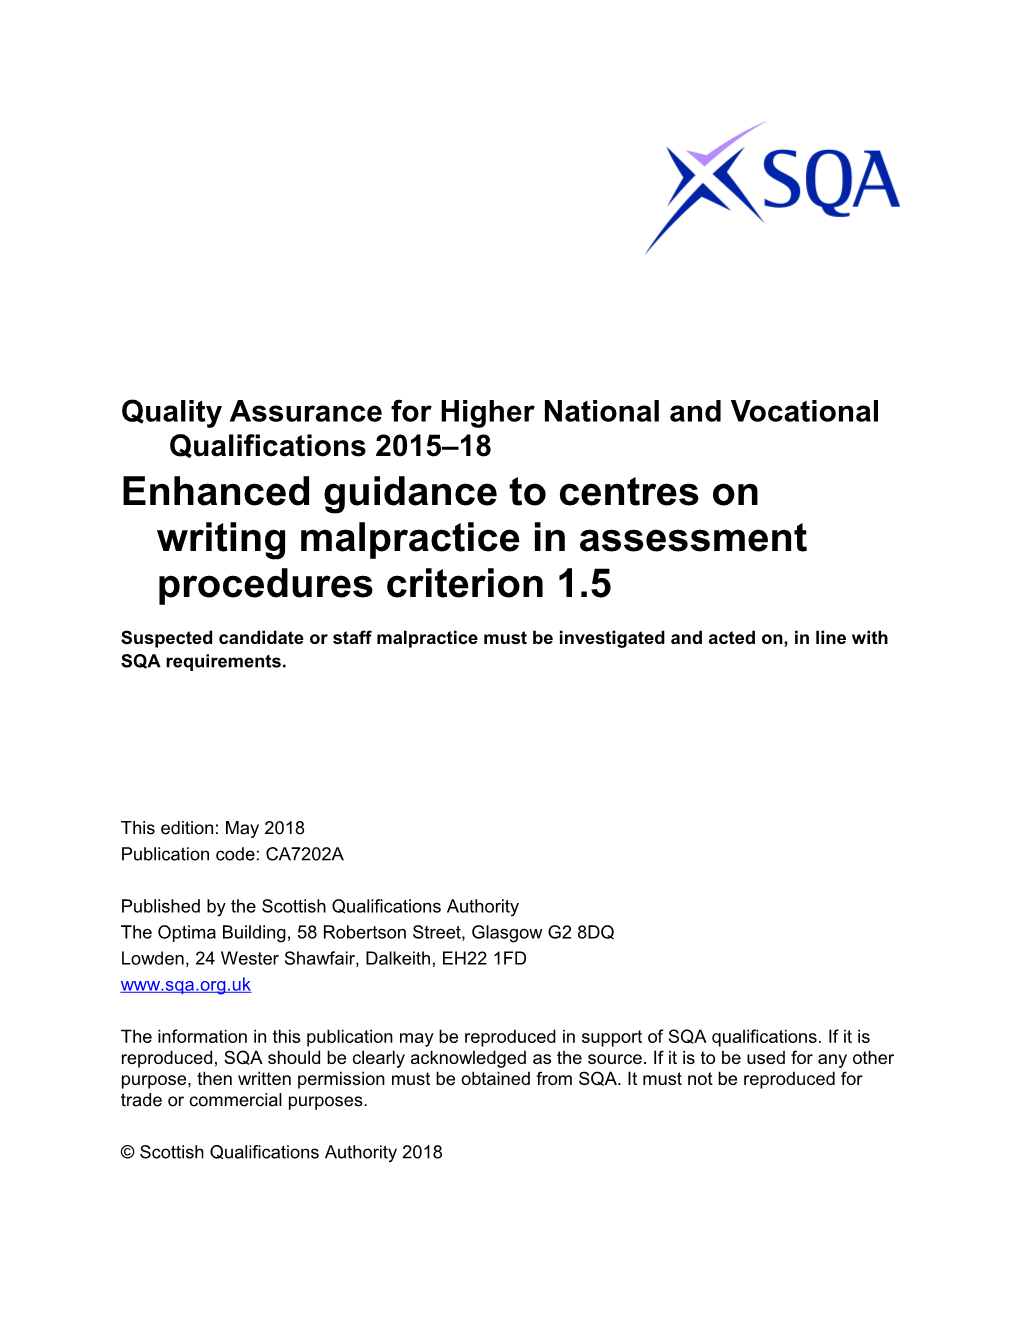 Quality Assurance for Higher National and Vocational Qualifications 2015 18